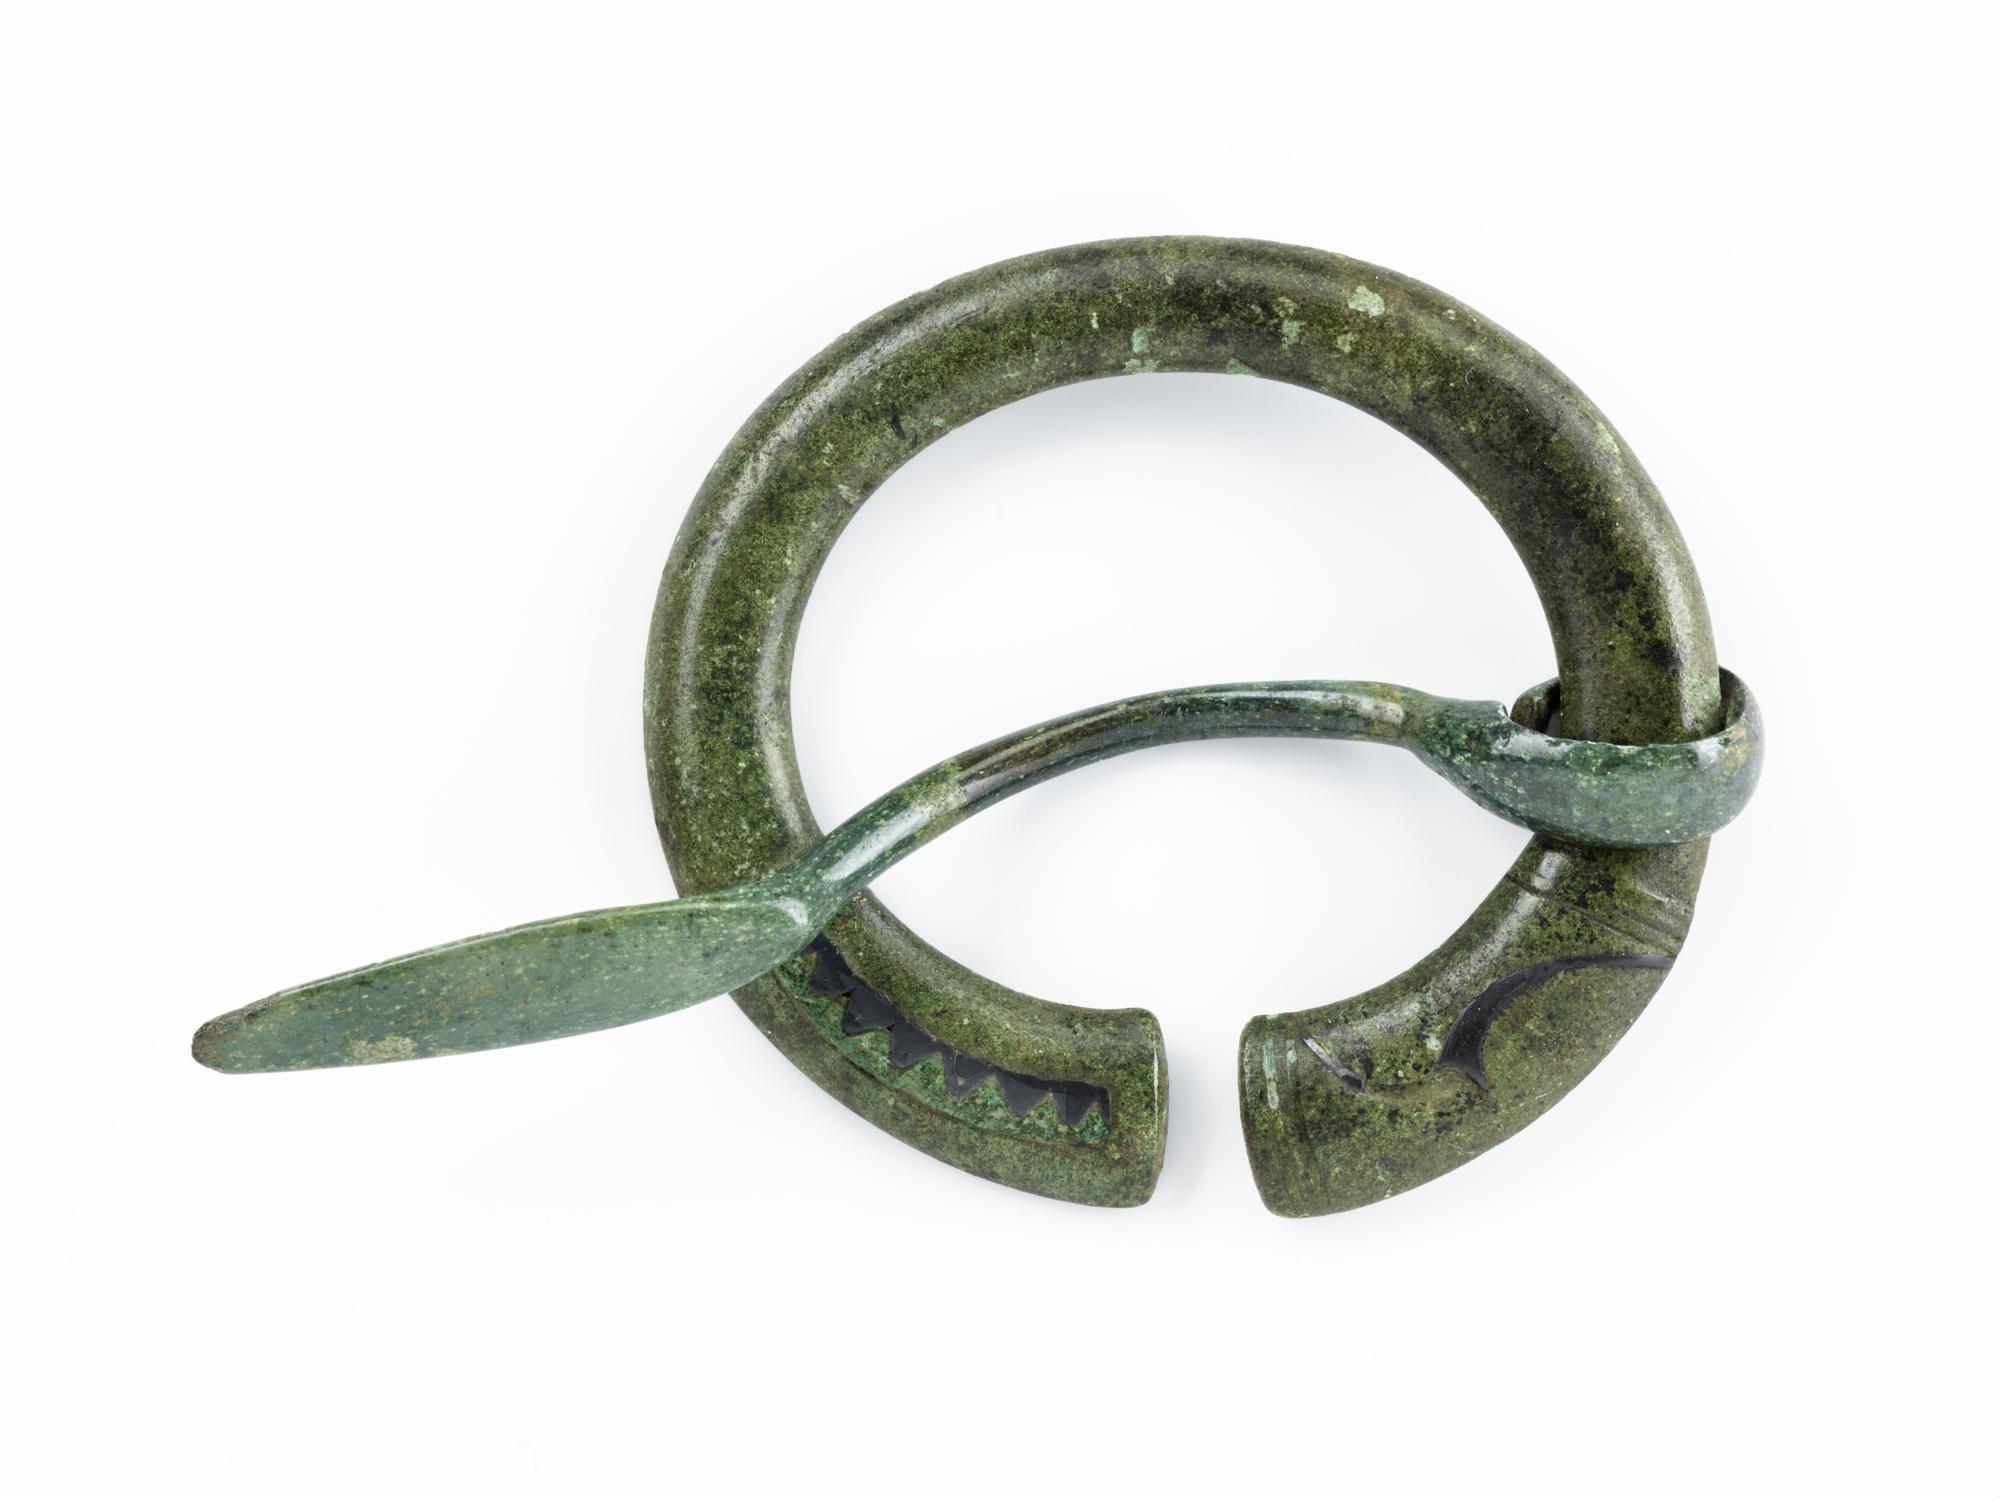 Image of Penannular brooch of bronze, with terminals decorated with blue enamel and silver inlay, from the Roman site at Newstead, late 1st or 2nd century AD © National Museums Scotland